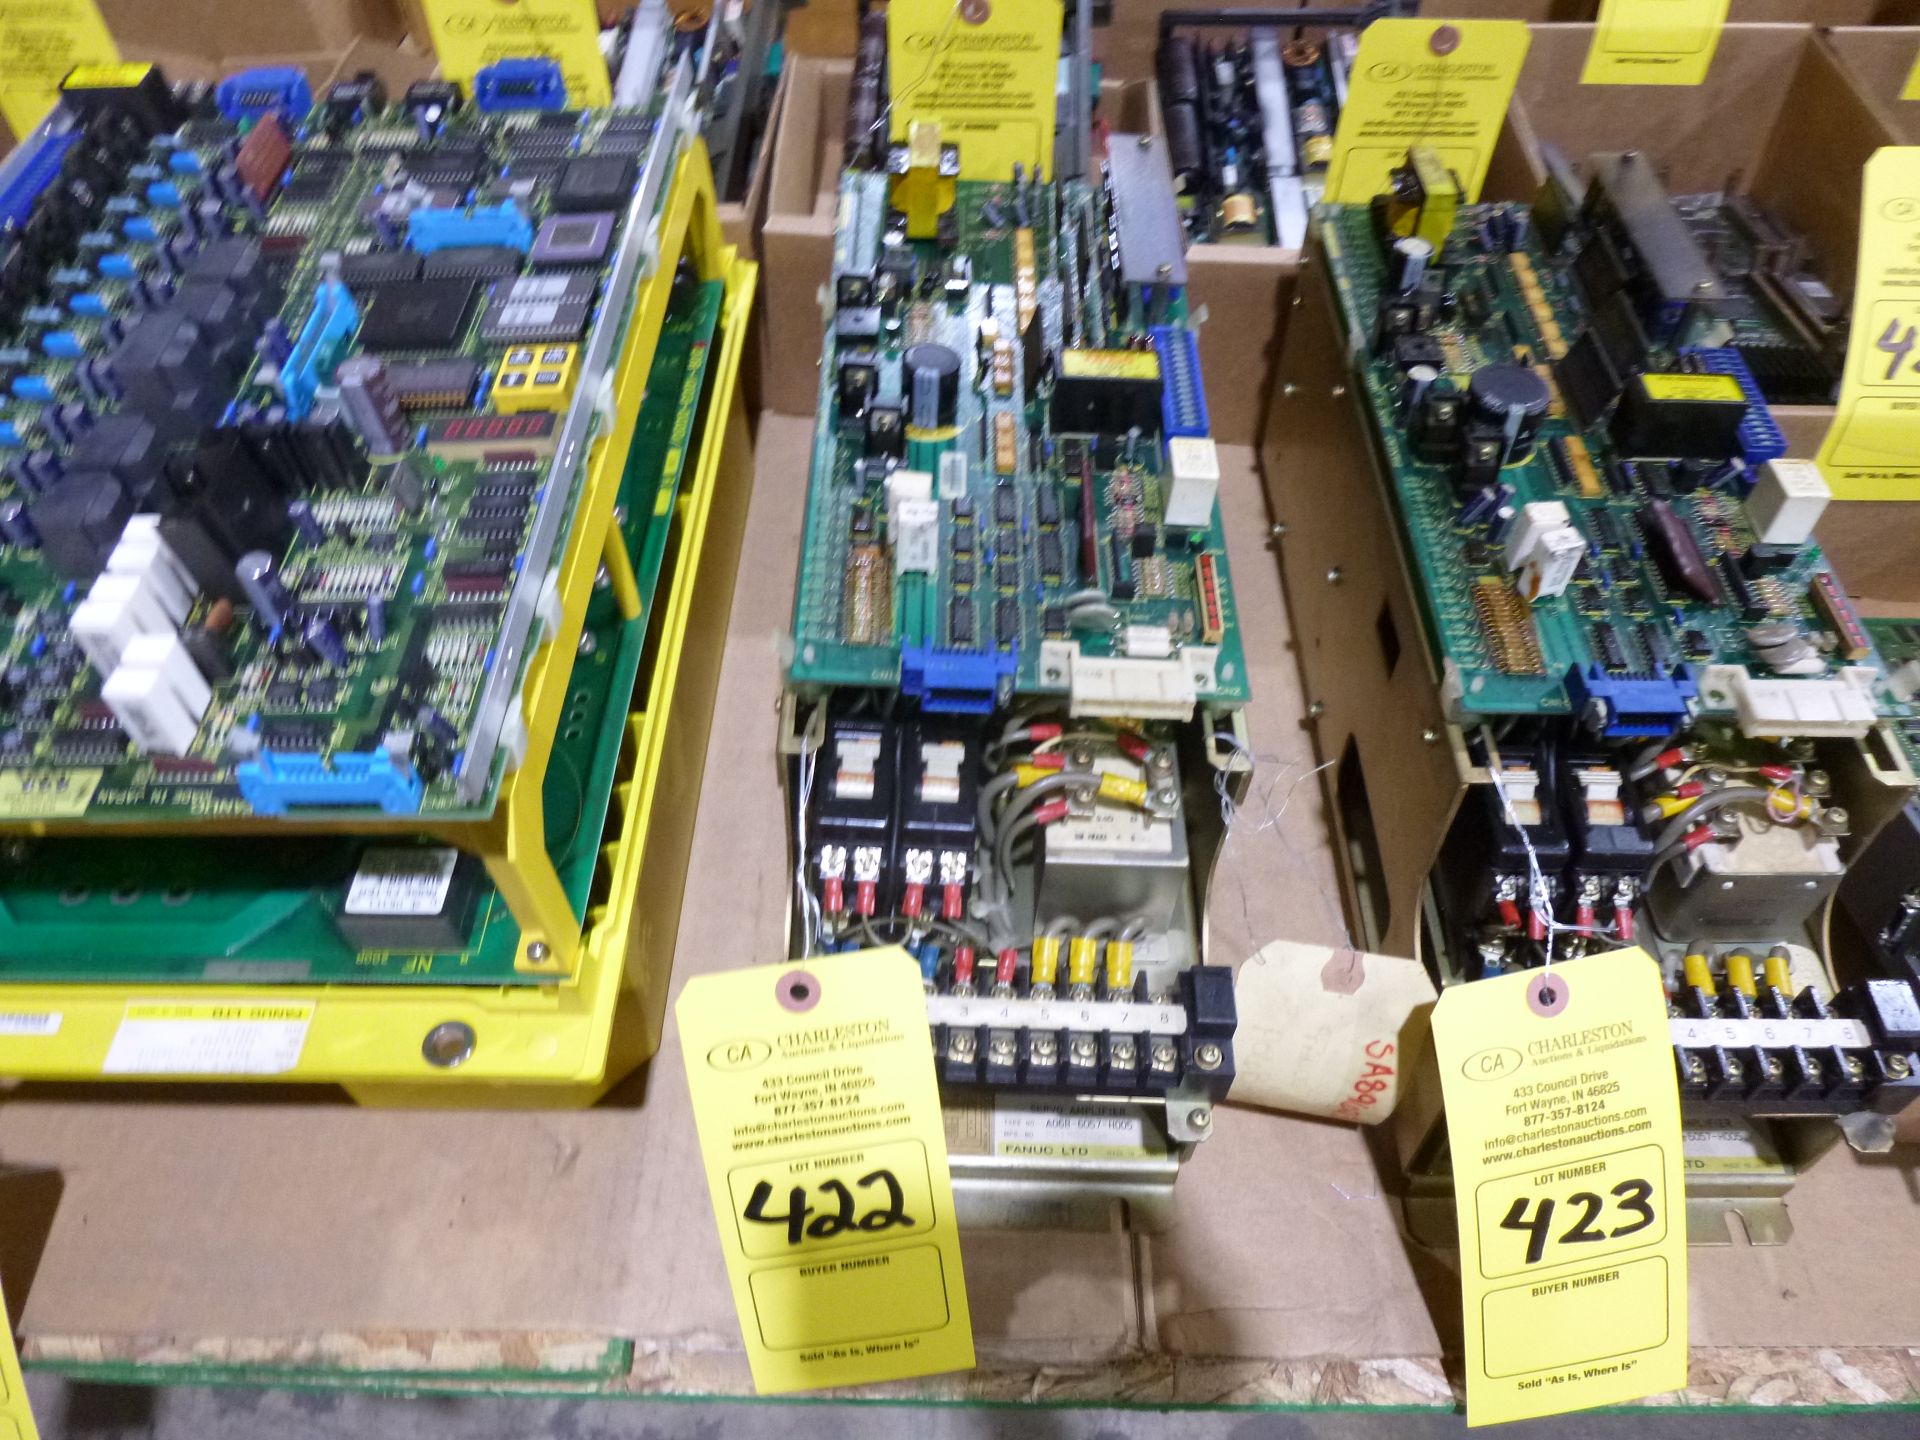 Fanuc servo amplifier model A06B-6057-H005, as always with Brolyn LLC auctions, all lots can be